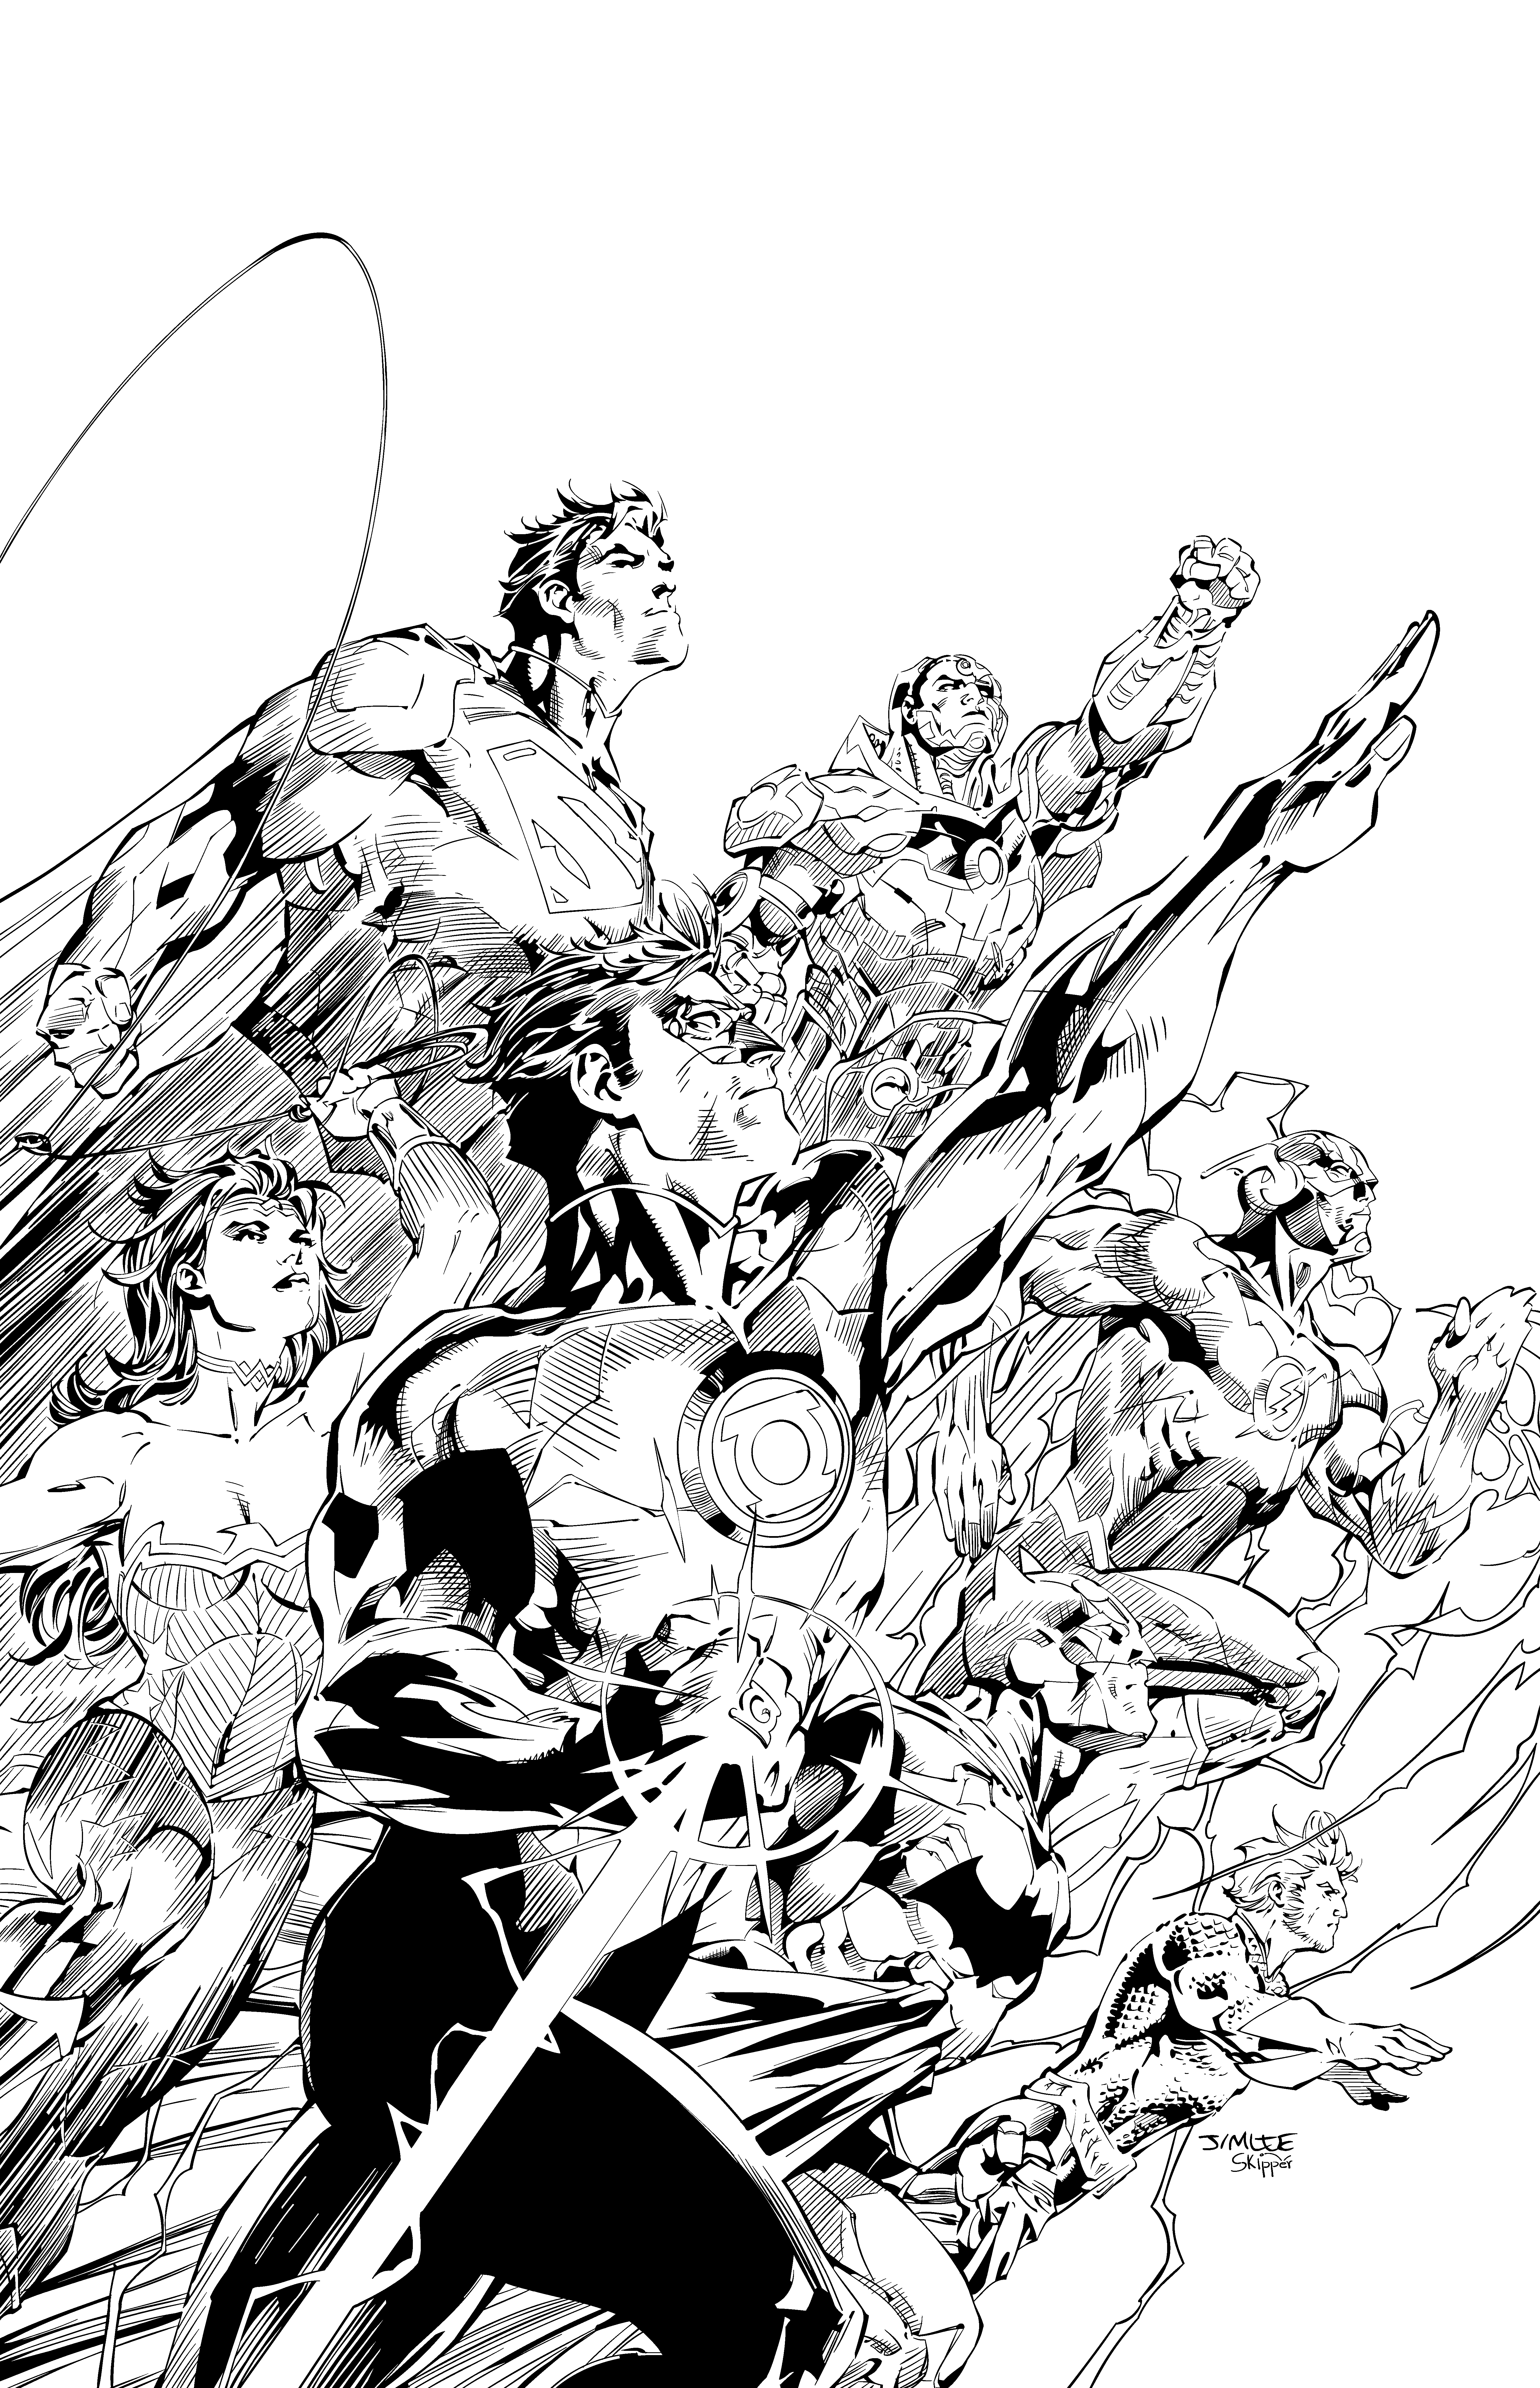 Justice League - inks